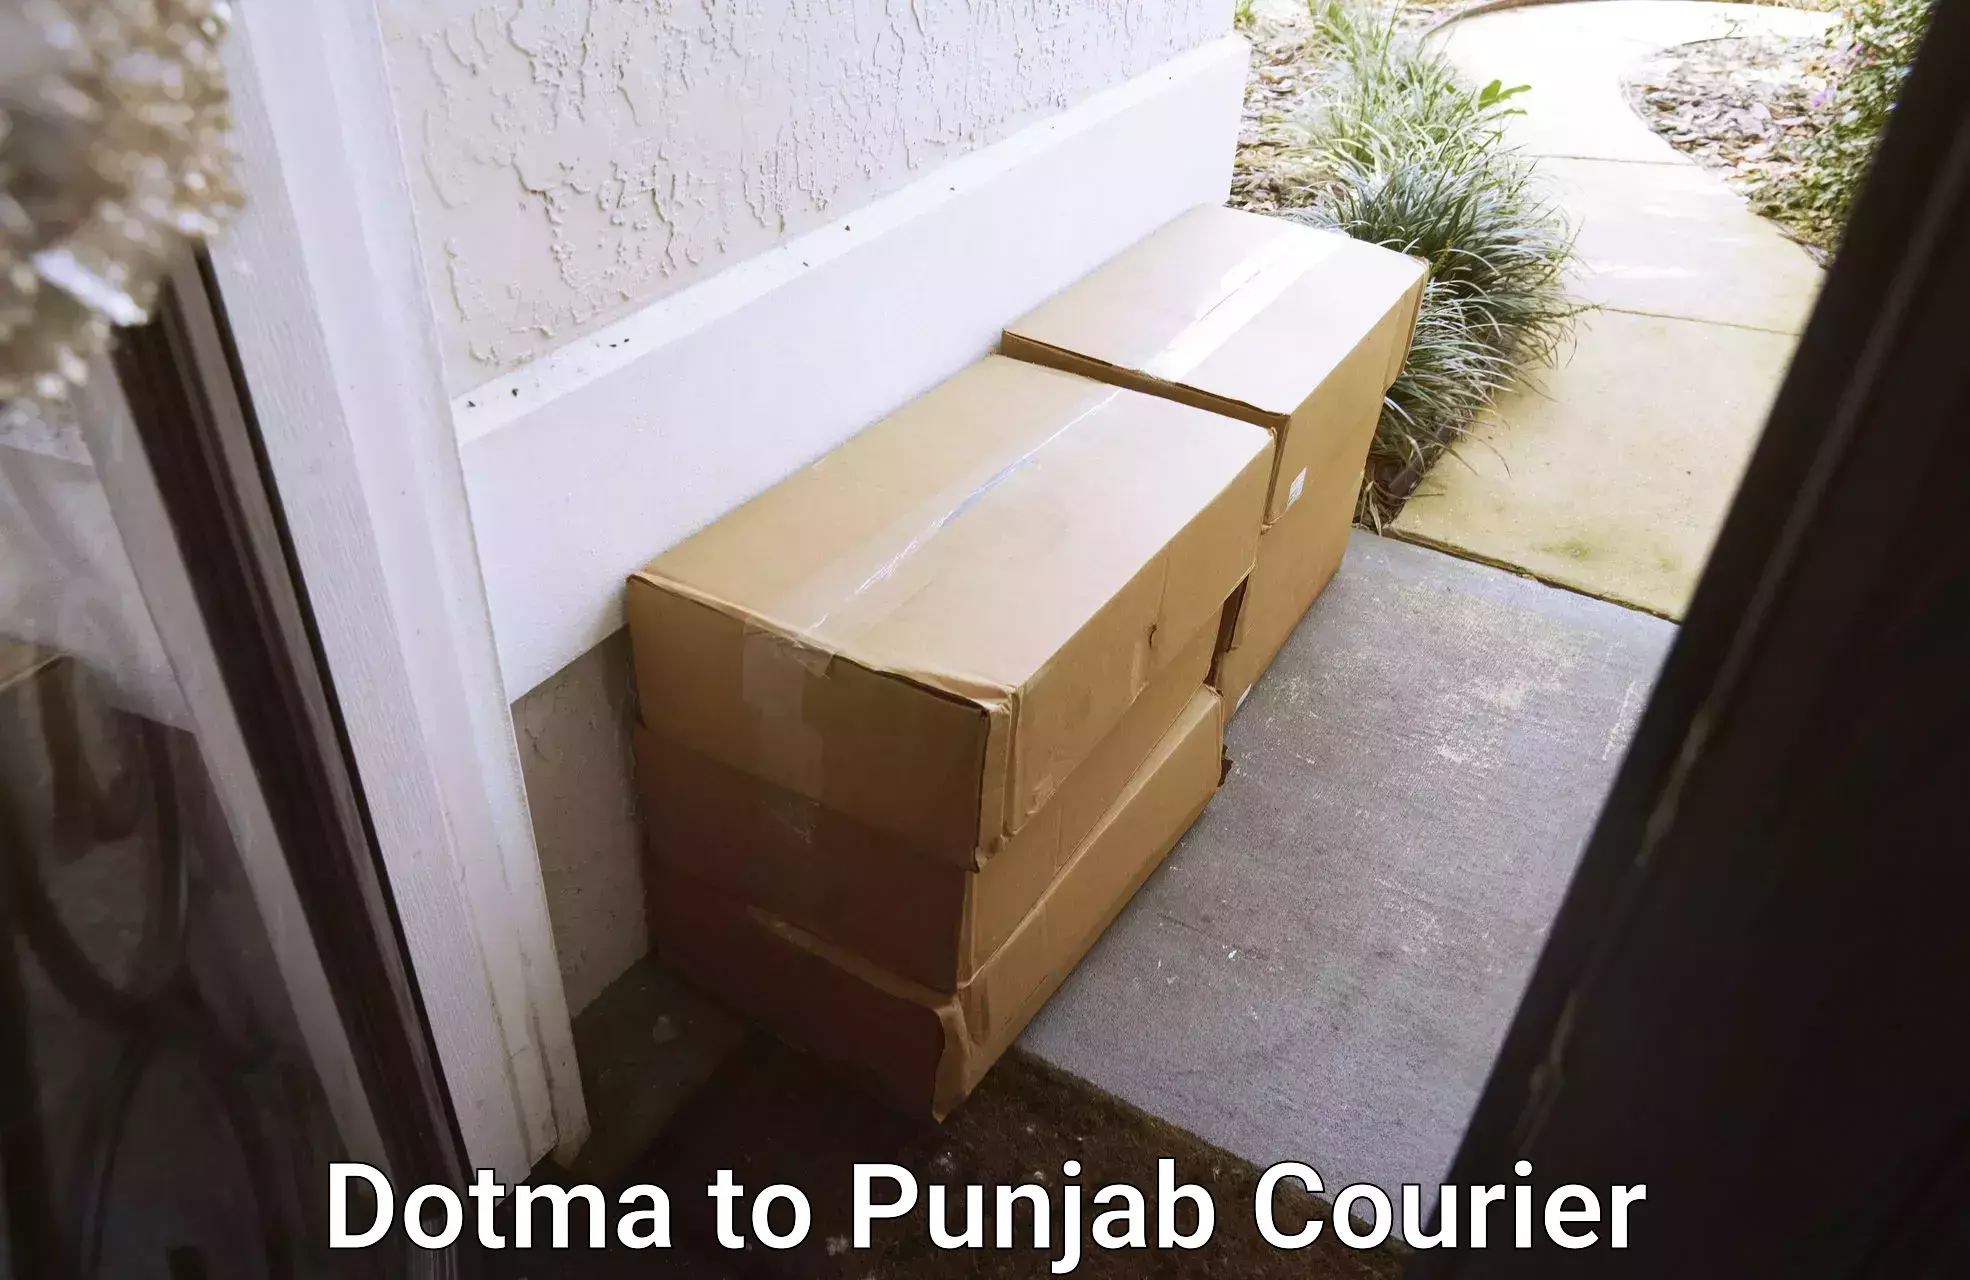 Parcel handling and care Dotma to Patiala